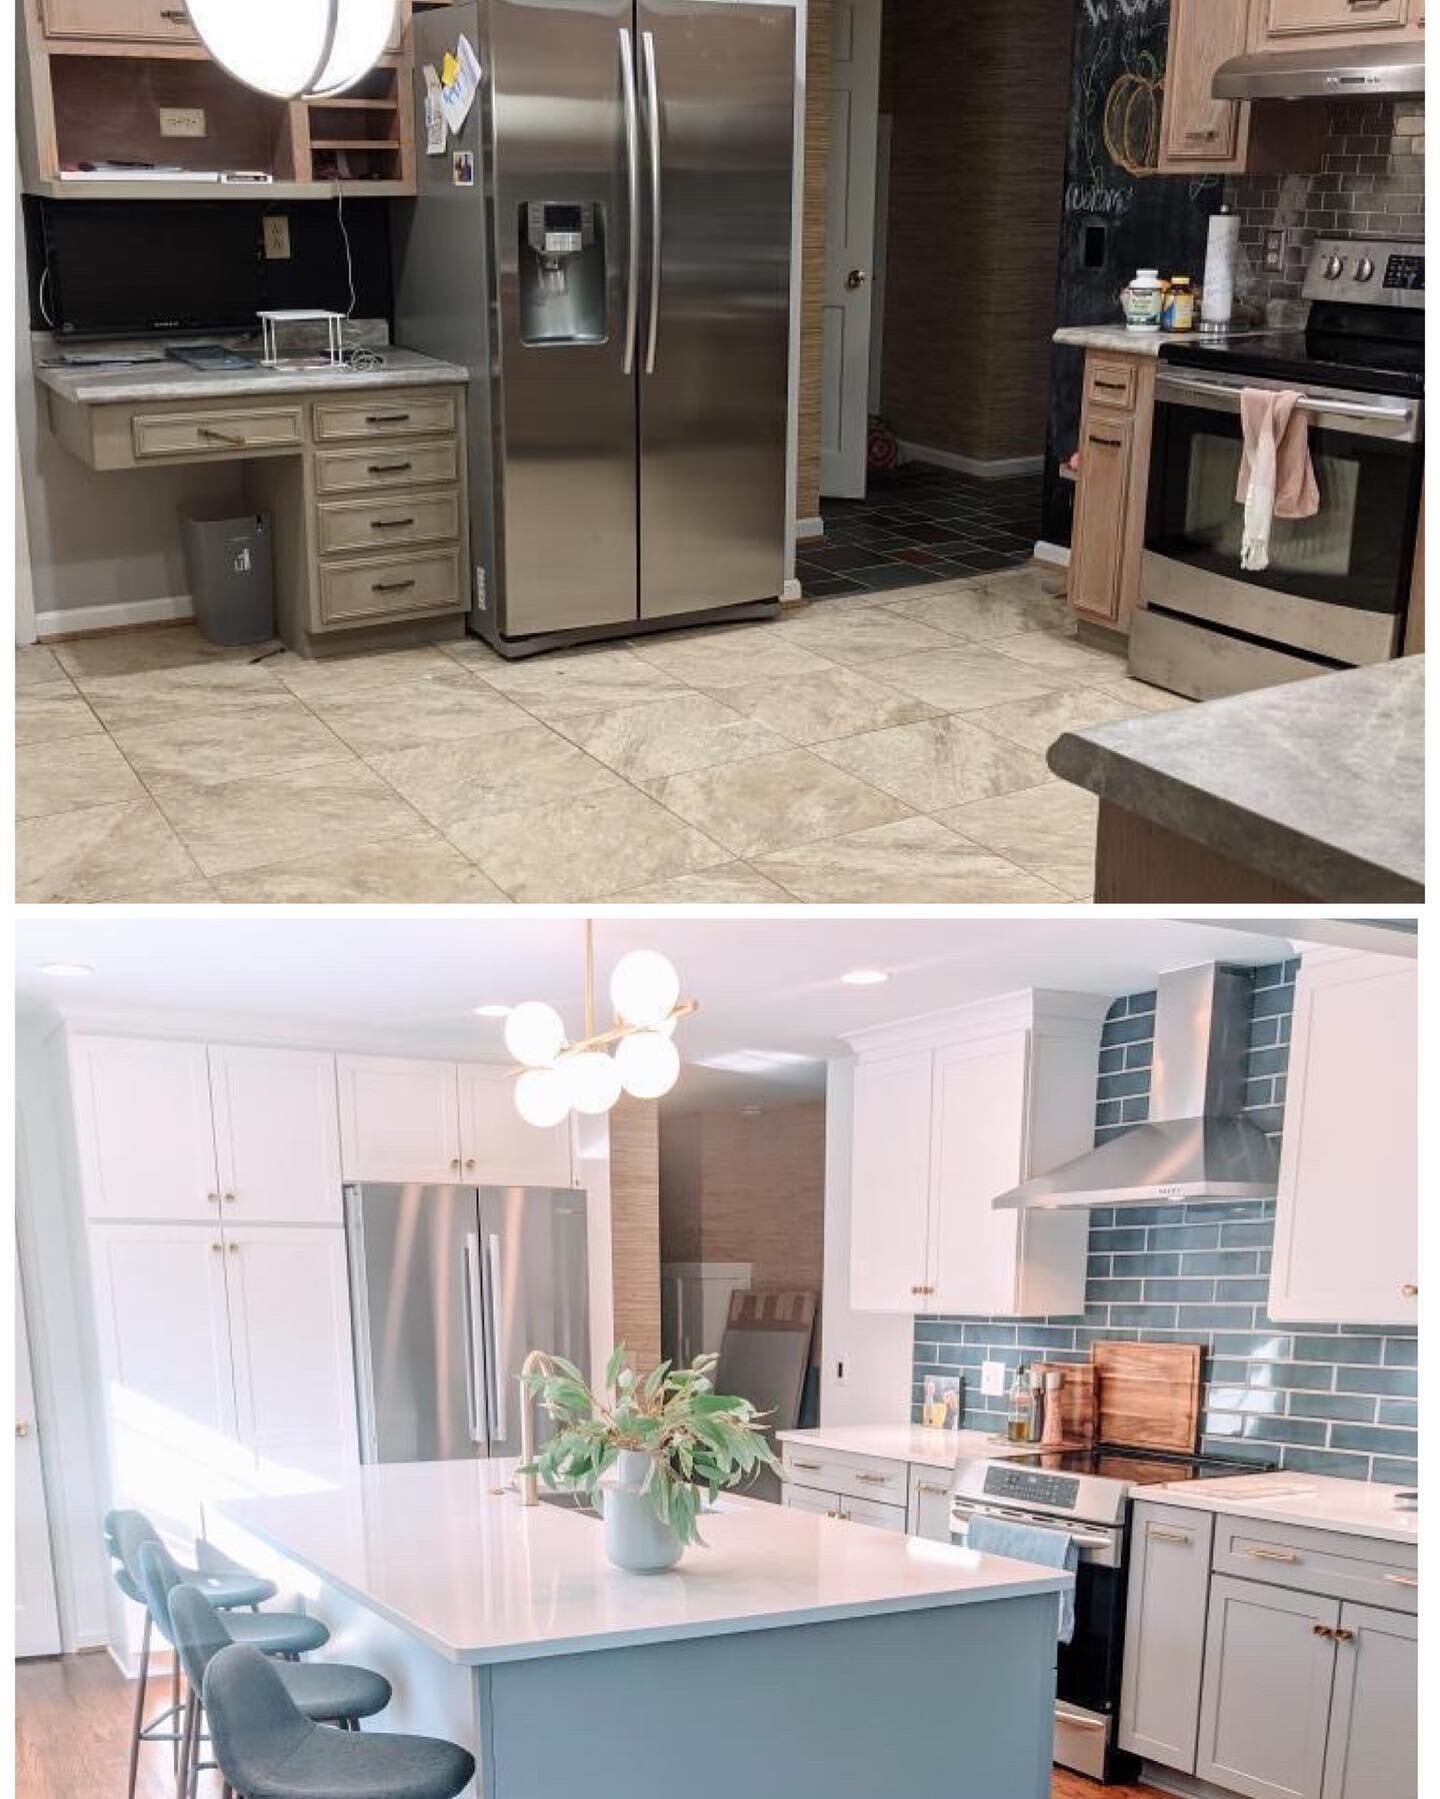 This stunning kitchen was the result of careful planning and sourcing during a 2-hour design consultation. My client Chris took the ideas we discussed and hit the ground running, making it all happen within his budget and on a speedy timeline. In our